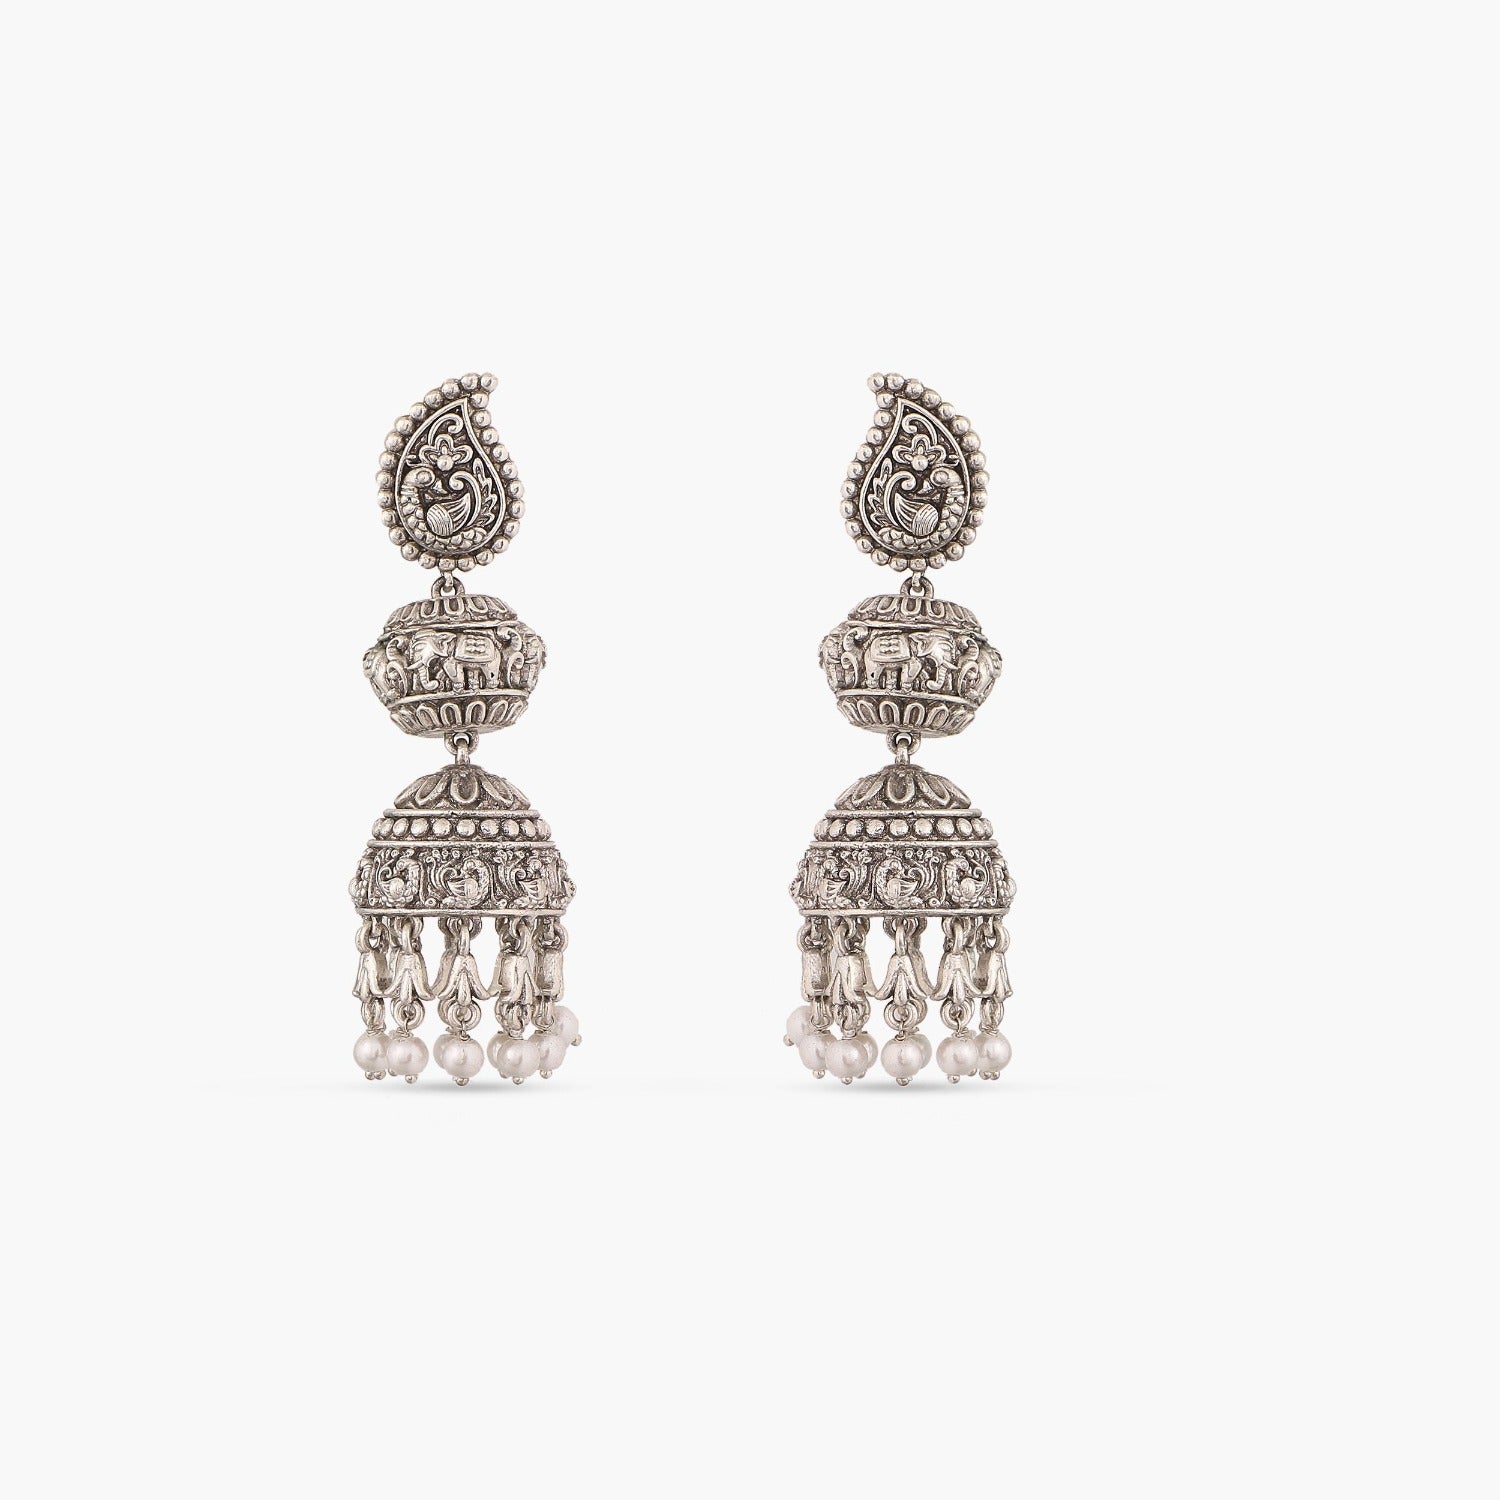 Bollywood Oxidized Silver Plated Handmade High Quality Jhumka Jhumki  Earrings/ Indian High Quality Big Jhumka/ Bridal Jhumka/ Free Shipping -  Etsy | Silver jewelry accessories, Silver jewellery indian, Oxidised silver  jewelry